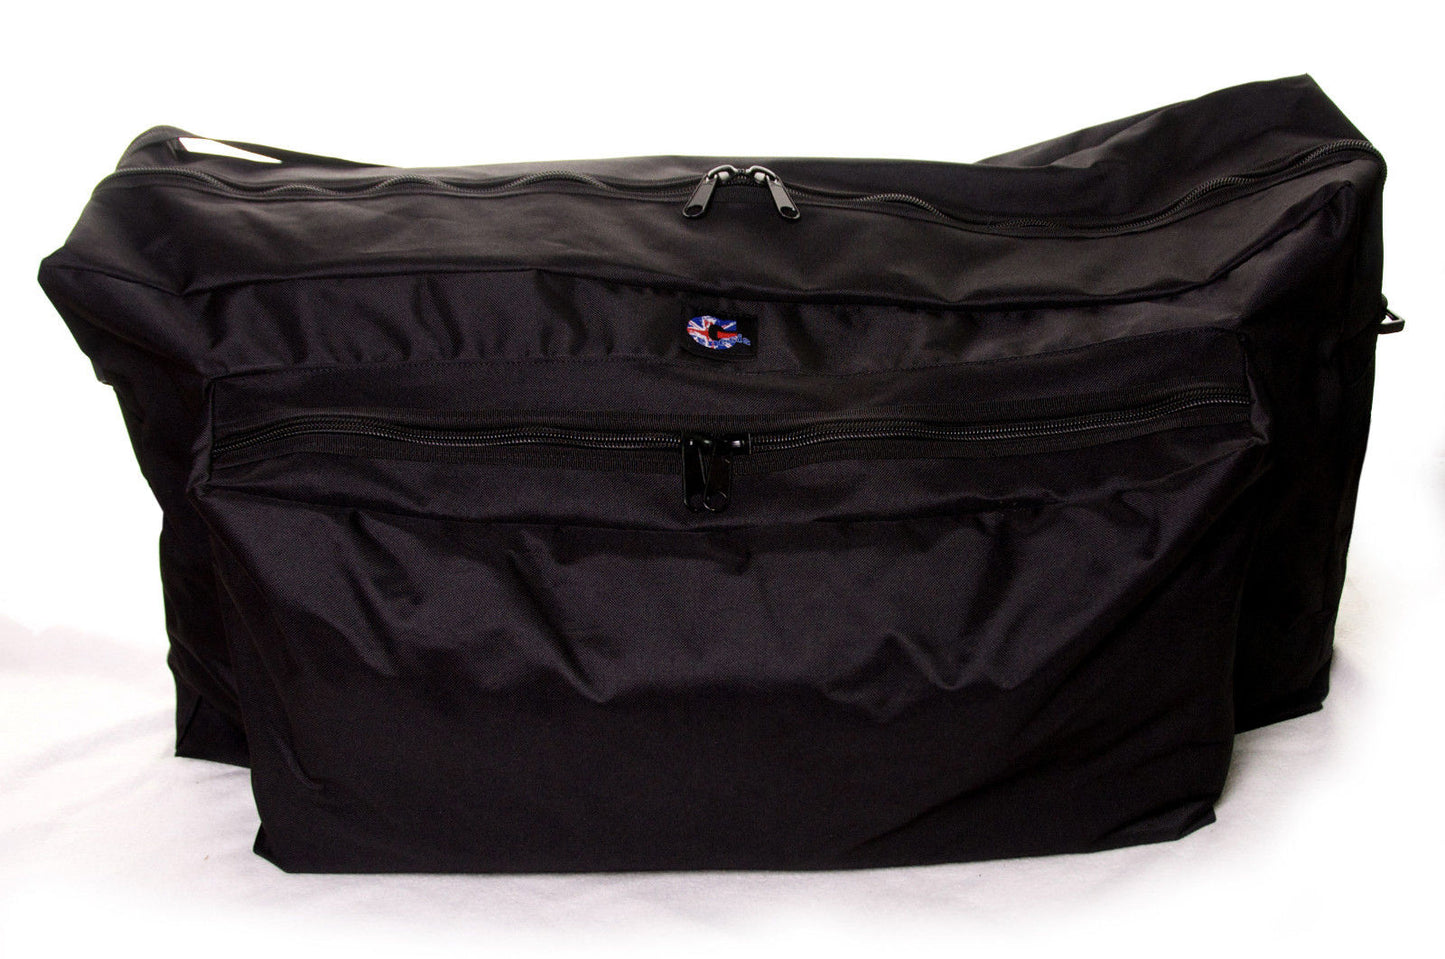 Genesis Travel Bag compatible with Silver Cross Wave